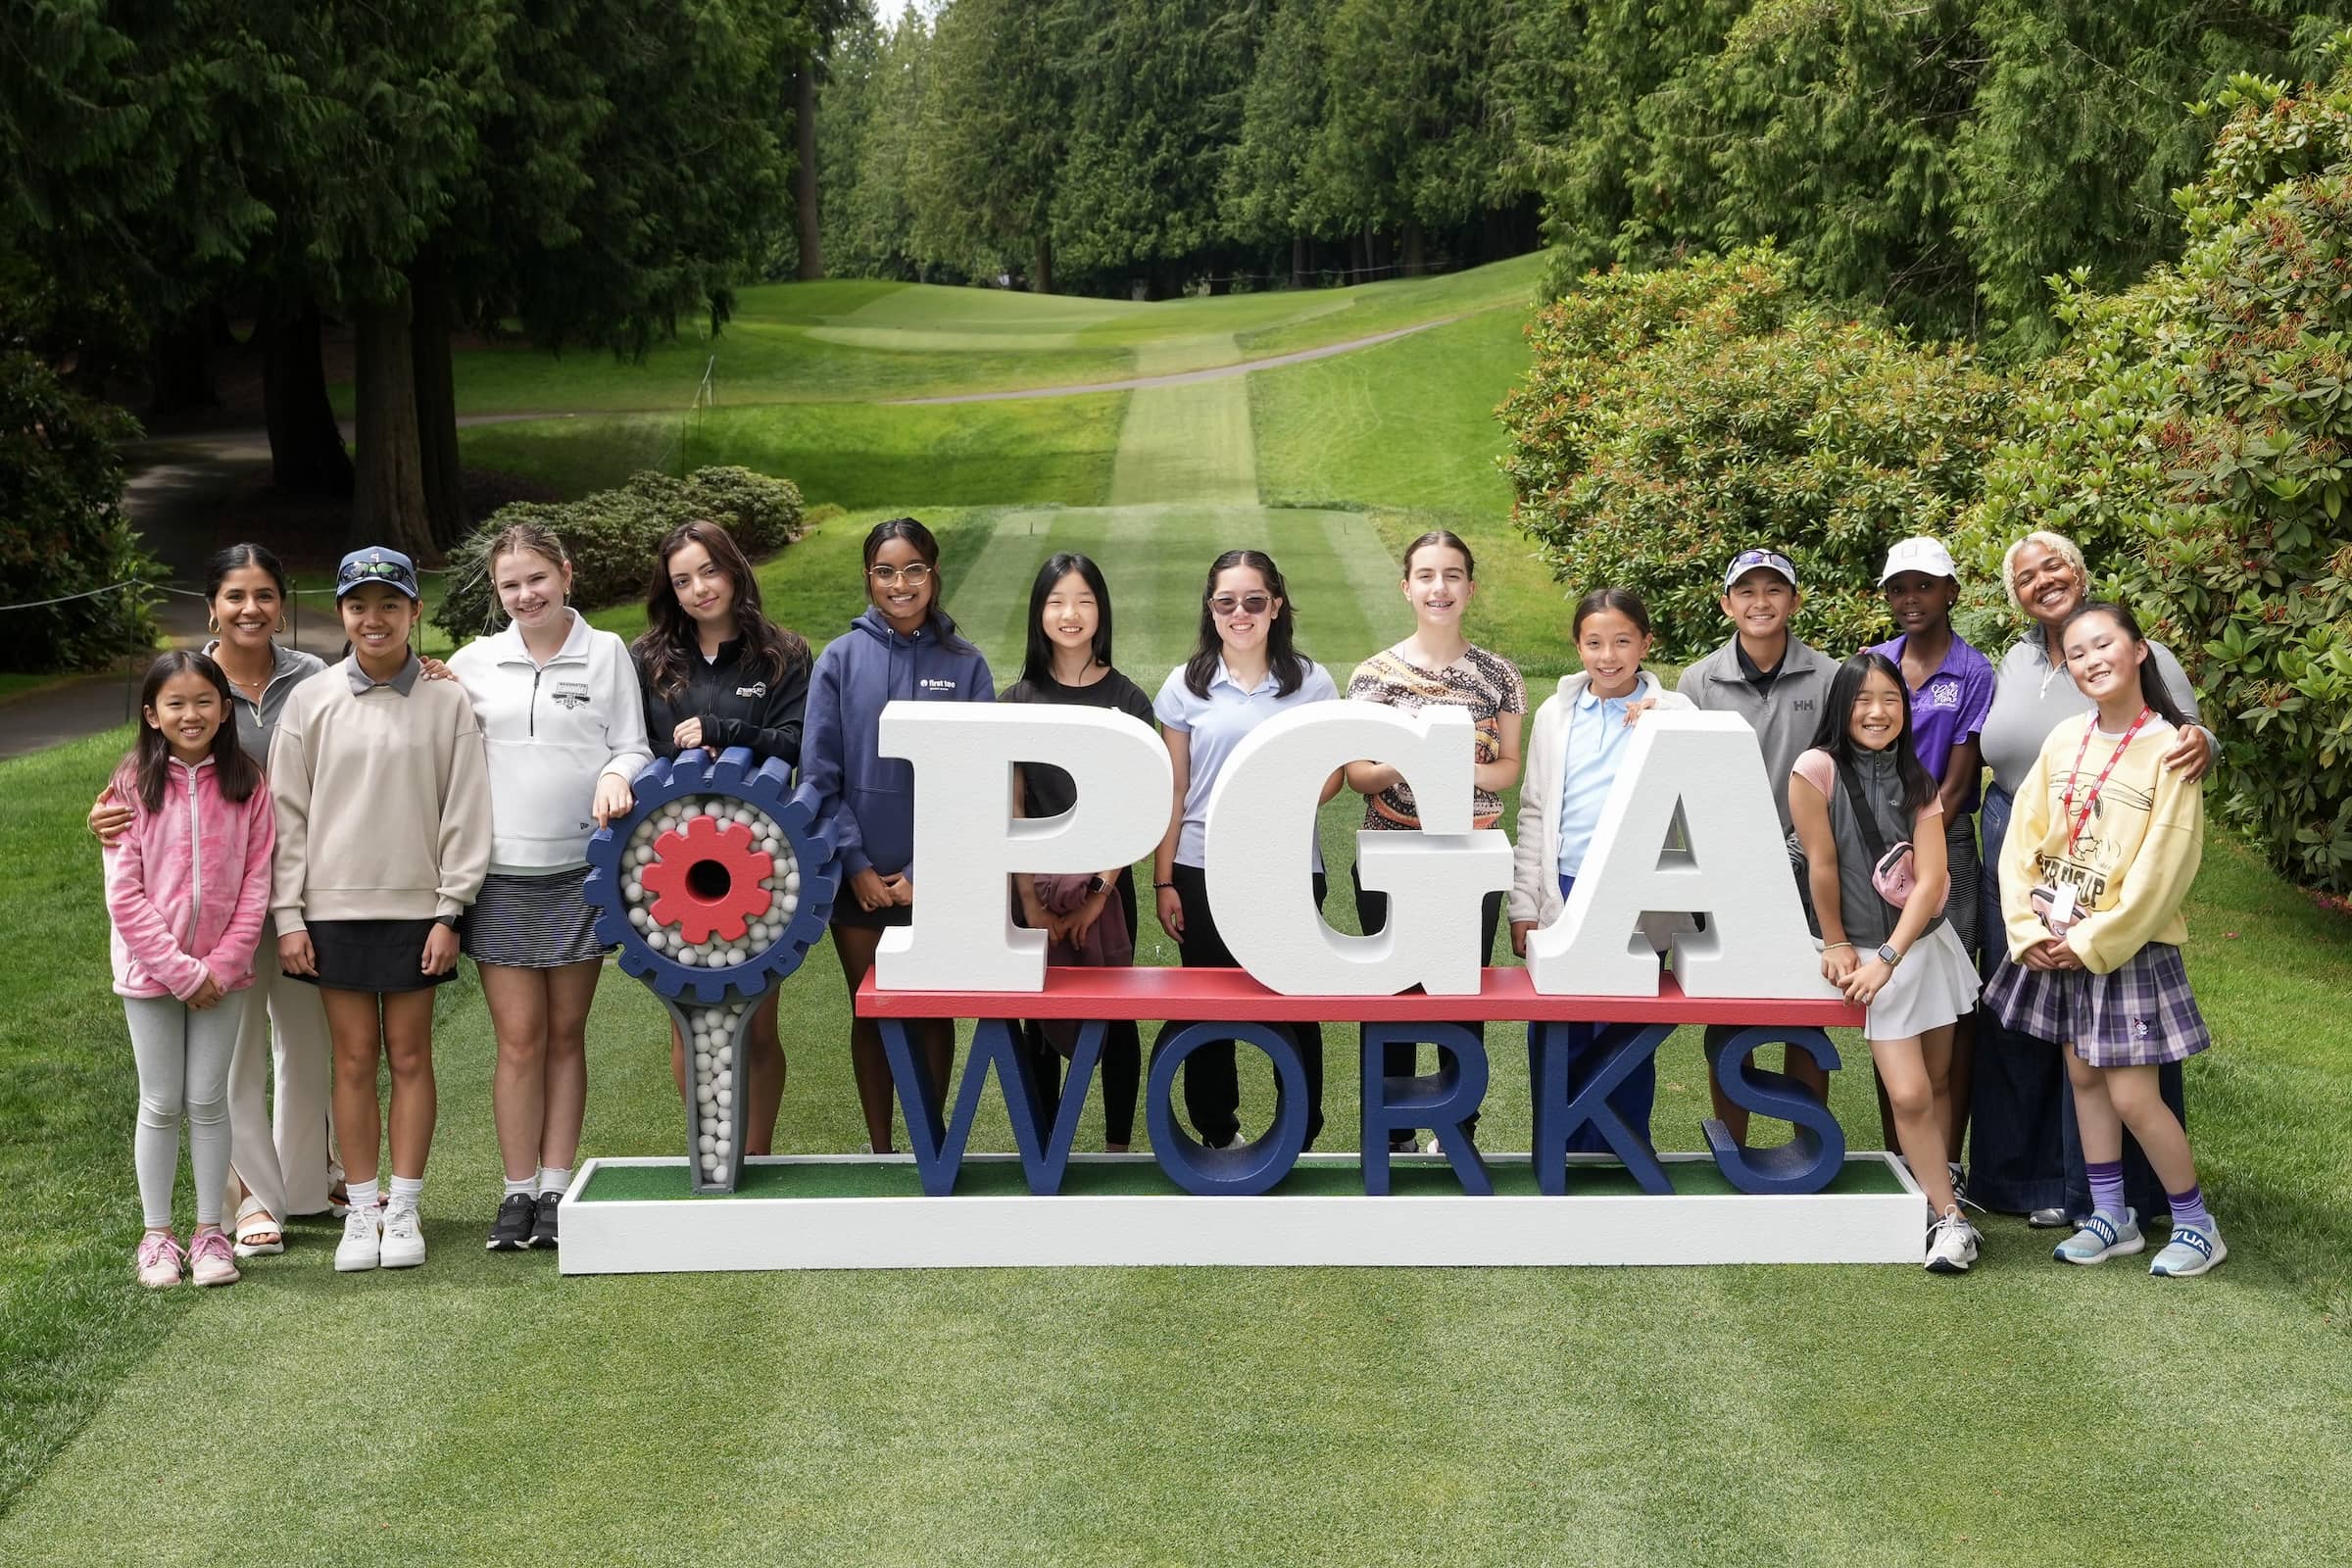 PGA WORKS staff and students pose during the PGA WORKS Beyond the Green